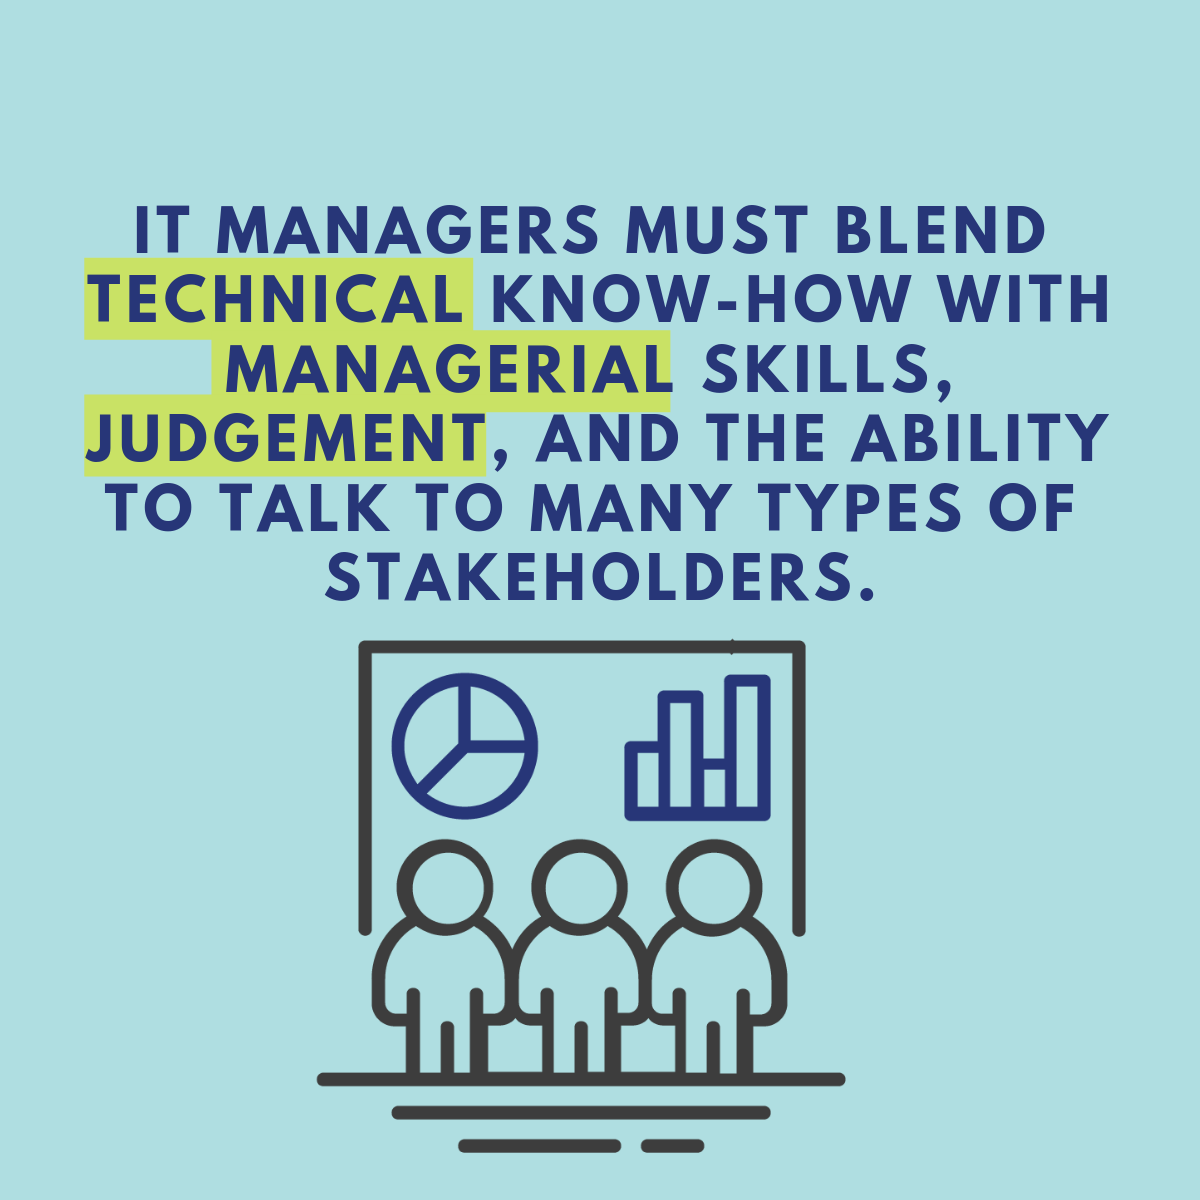 IT managers must blend technical know-how with managerial skills, judgement, and ability to talk to many types of stakeholders